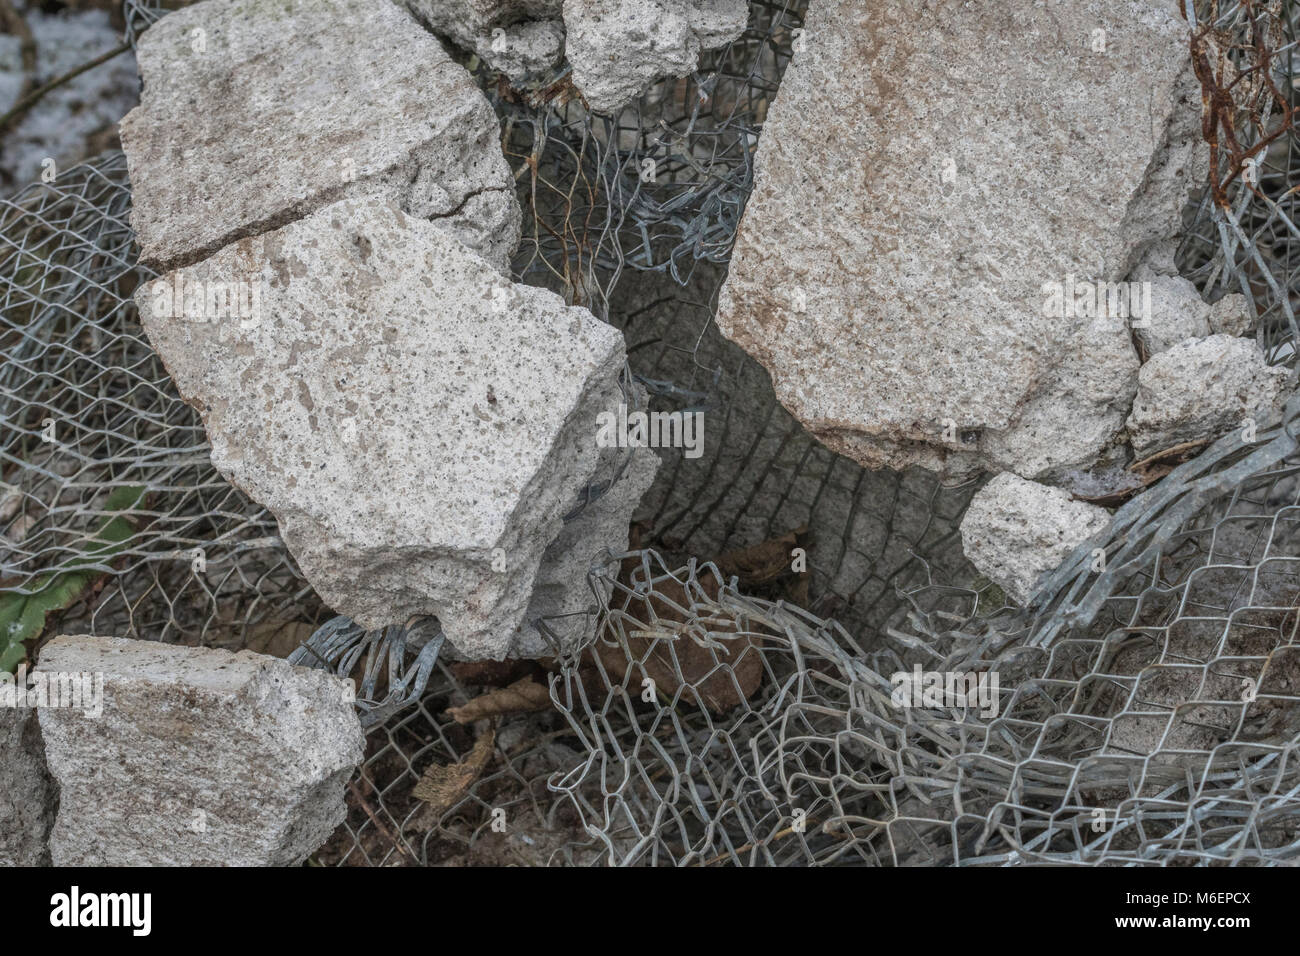 Close-up of mesh and concrete at a builder's rubble pile. Metaphor for broken in pieces, in tatters, shattered in pieces. Stock Photo